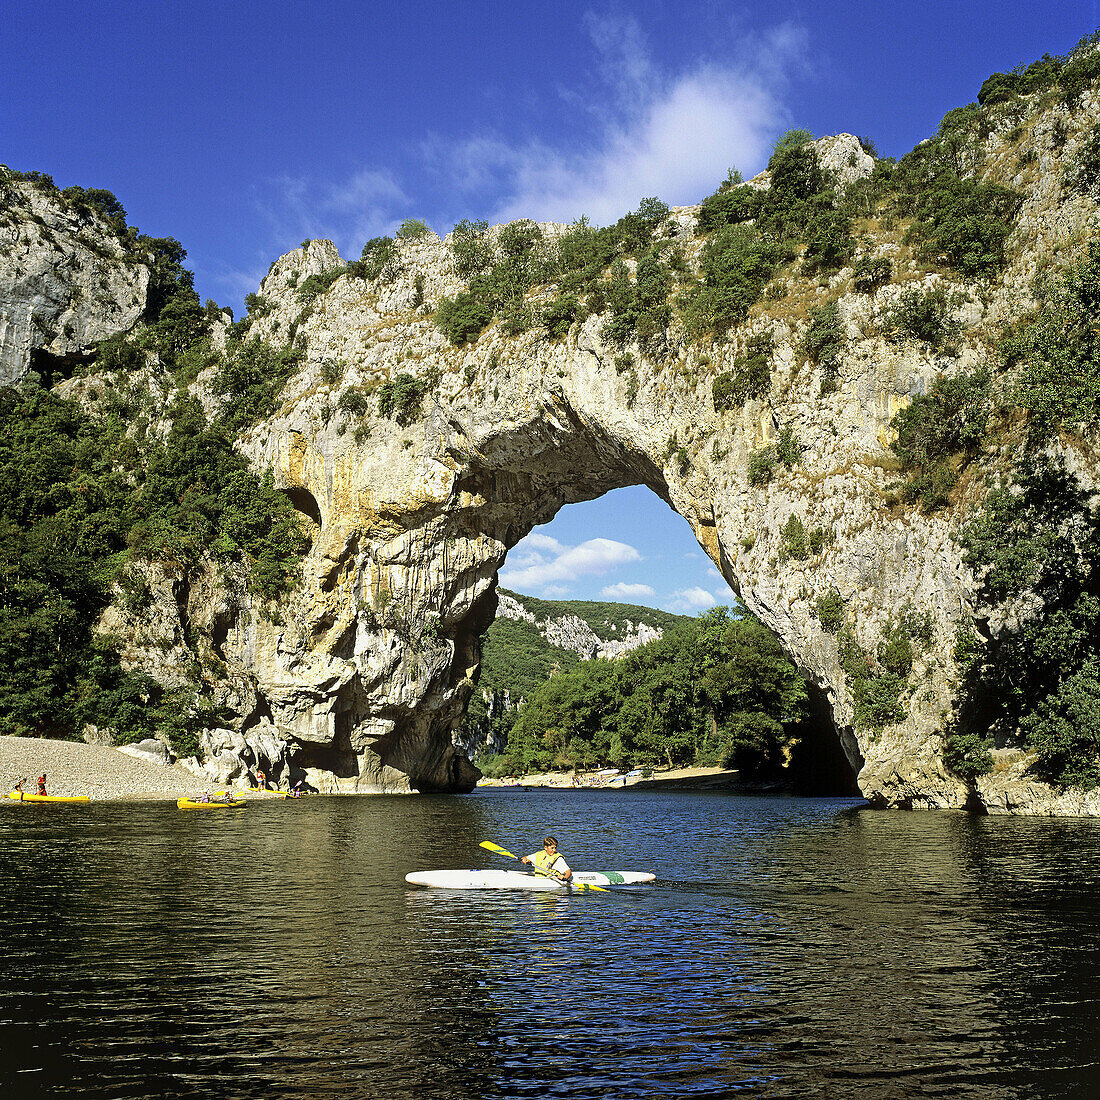 Across, active, activity, adventure, agility, agreeable, amusement, arc, arch, Ardèche, attraction, blue, boat, boy, canoe, canoeing, carefree, Caucasian ethnicity, climate, Color image, contemporary, day, destination, discovery, ecosystem, effort, enchan